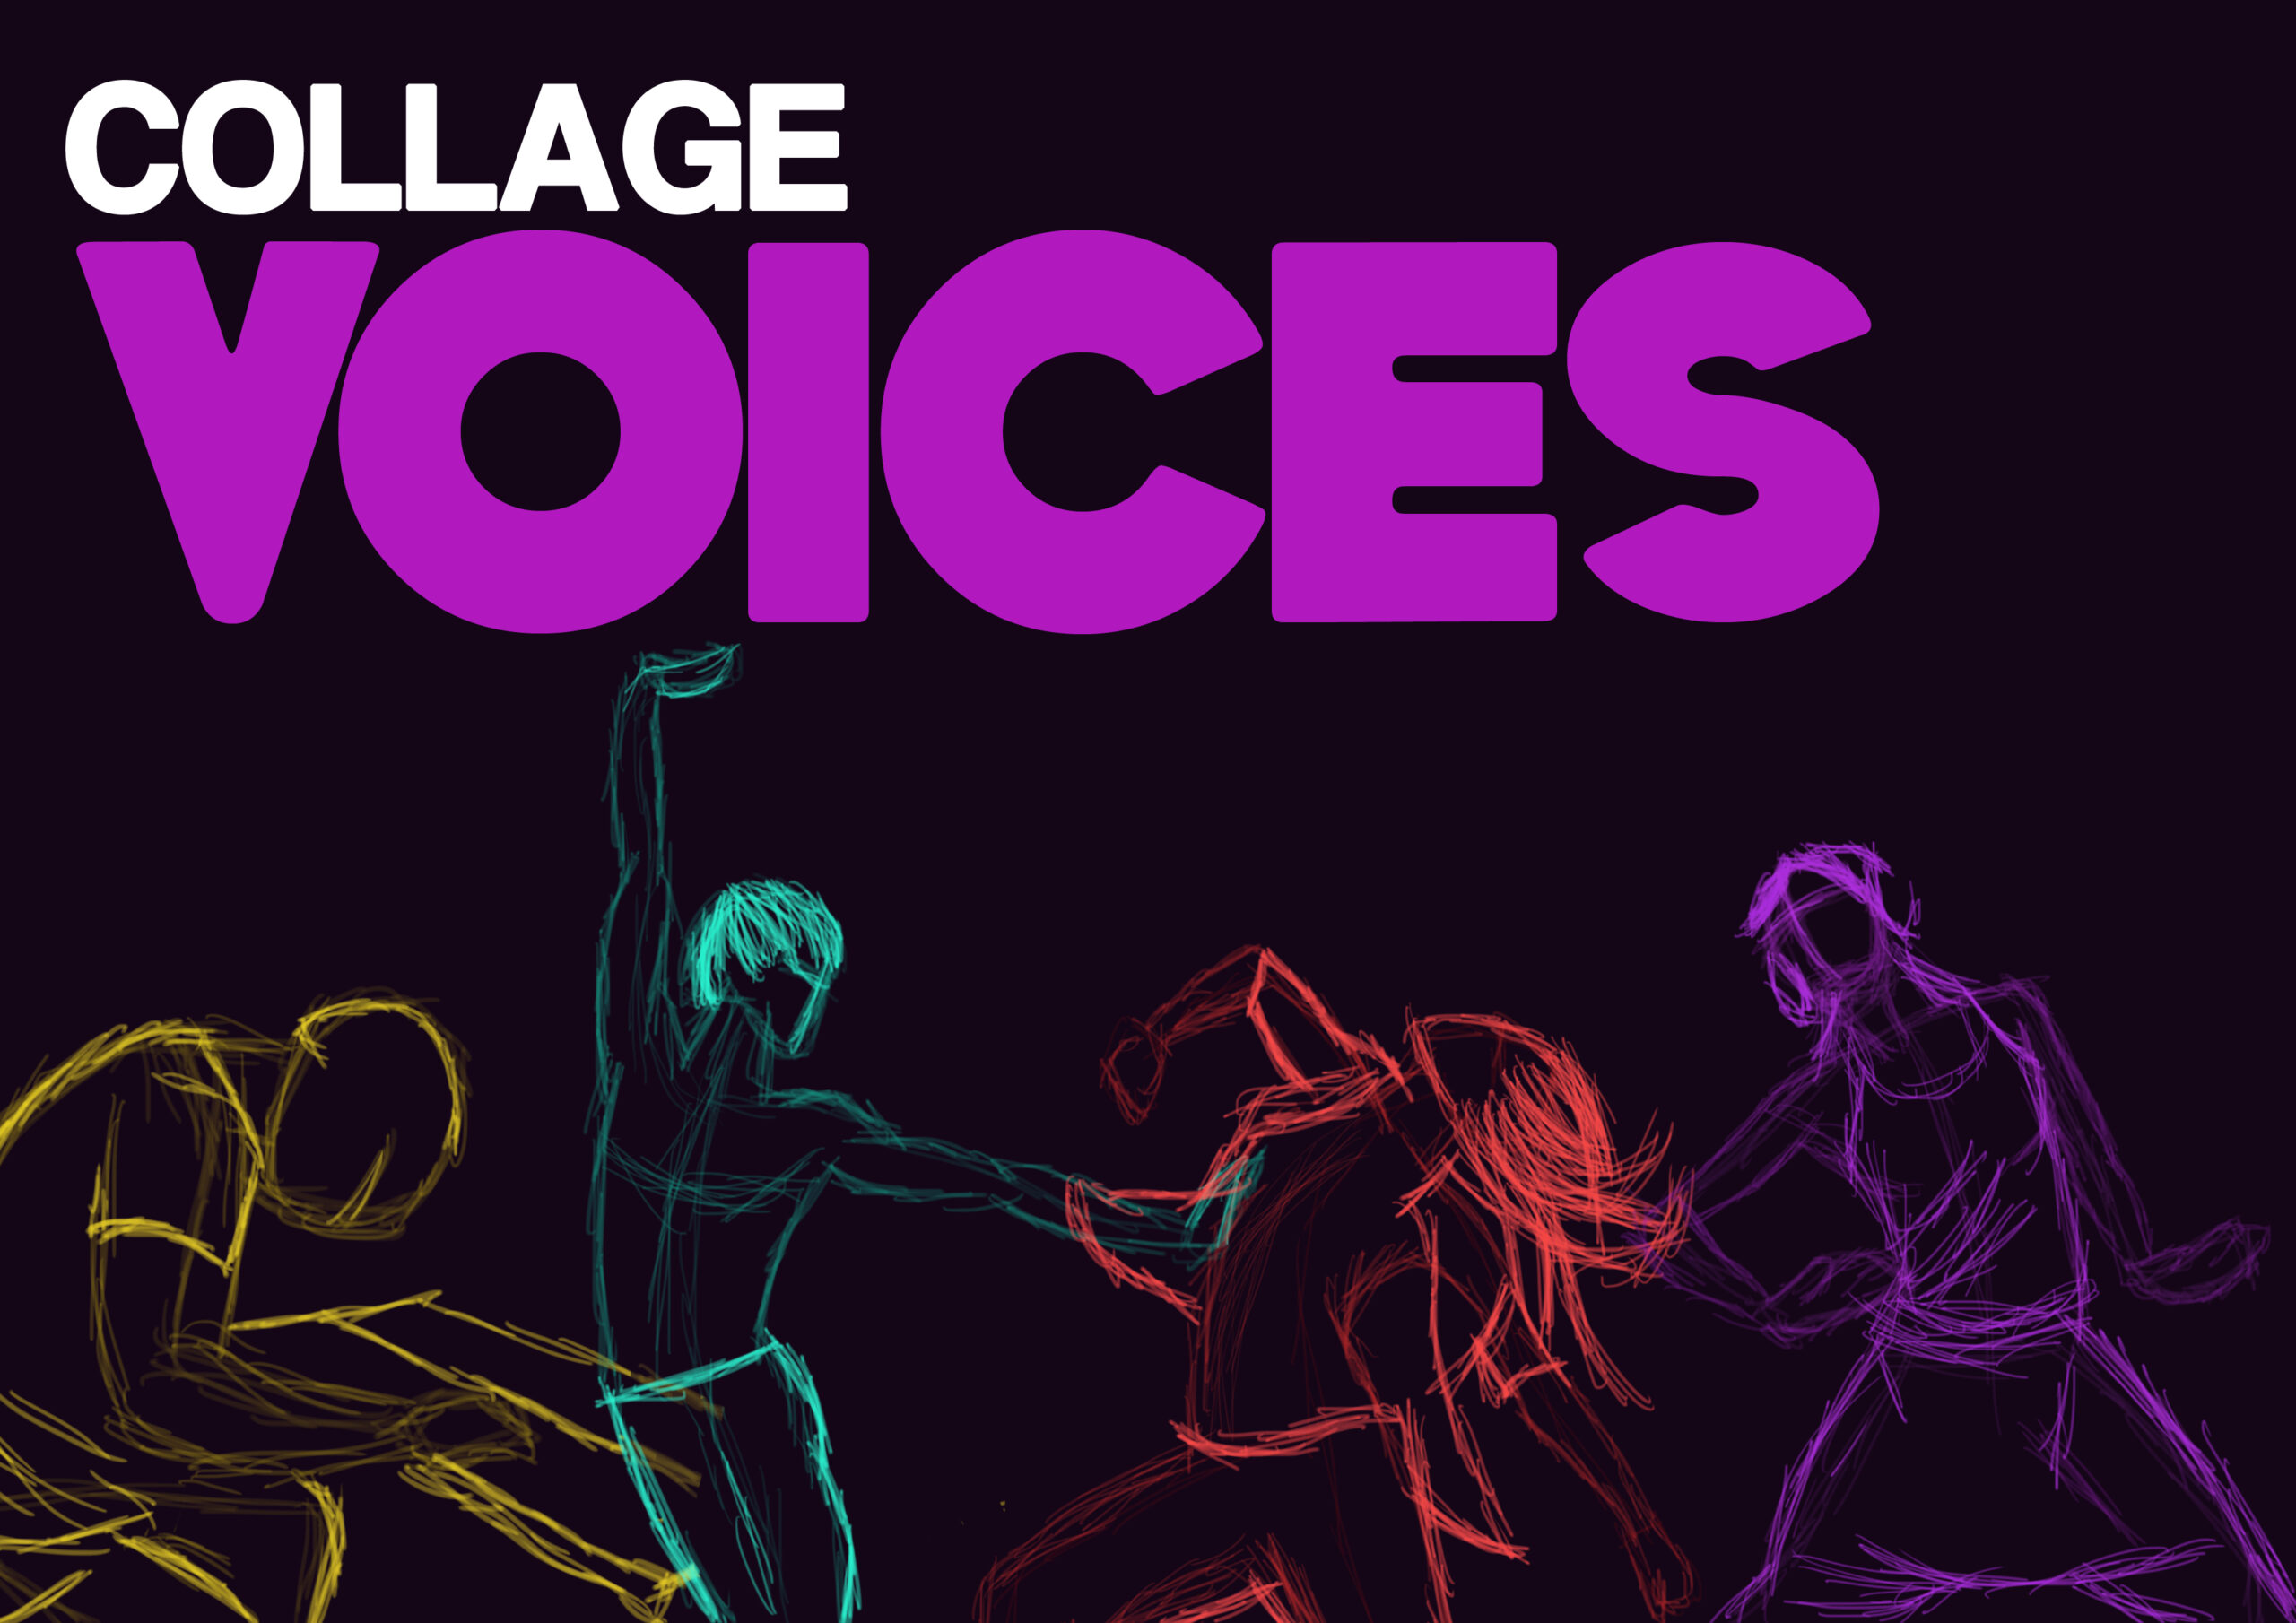 Collage Voices